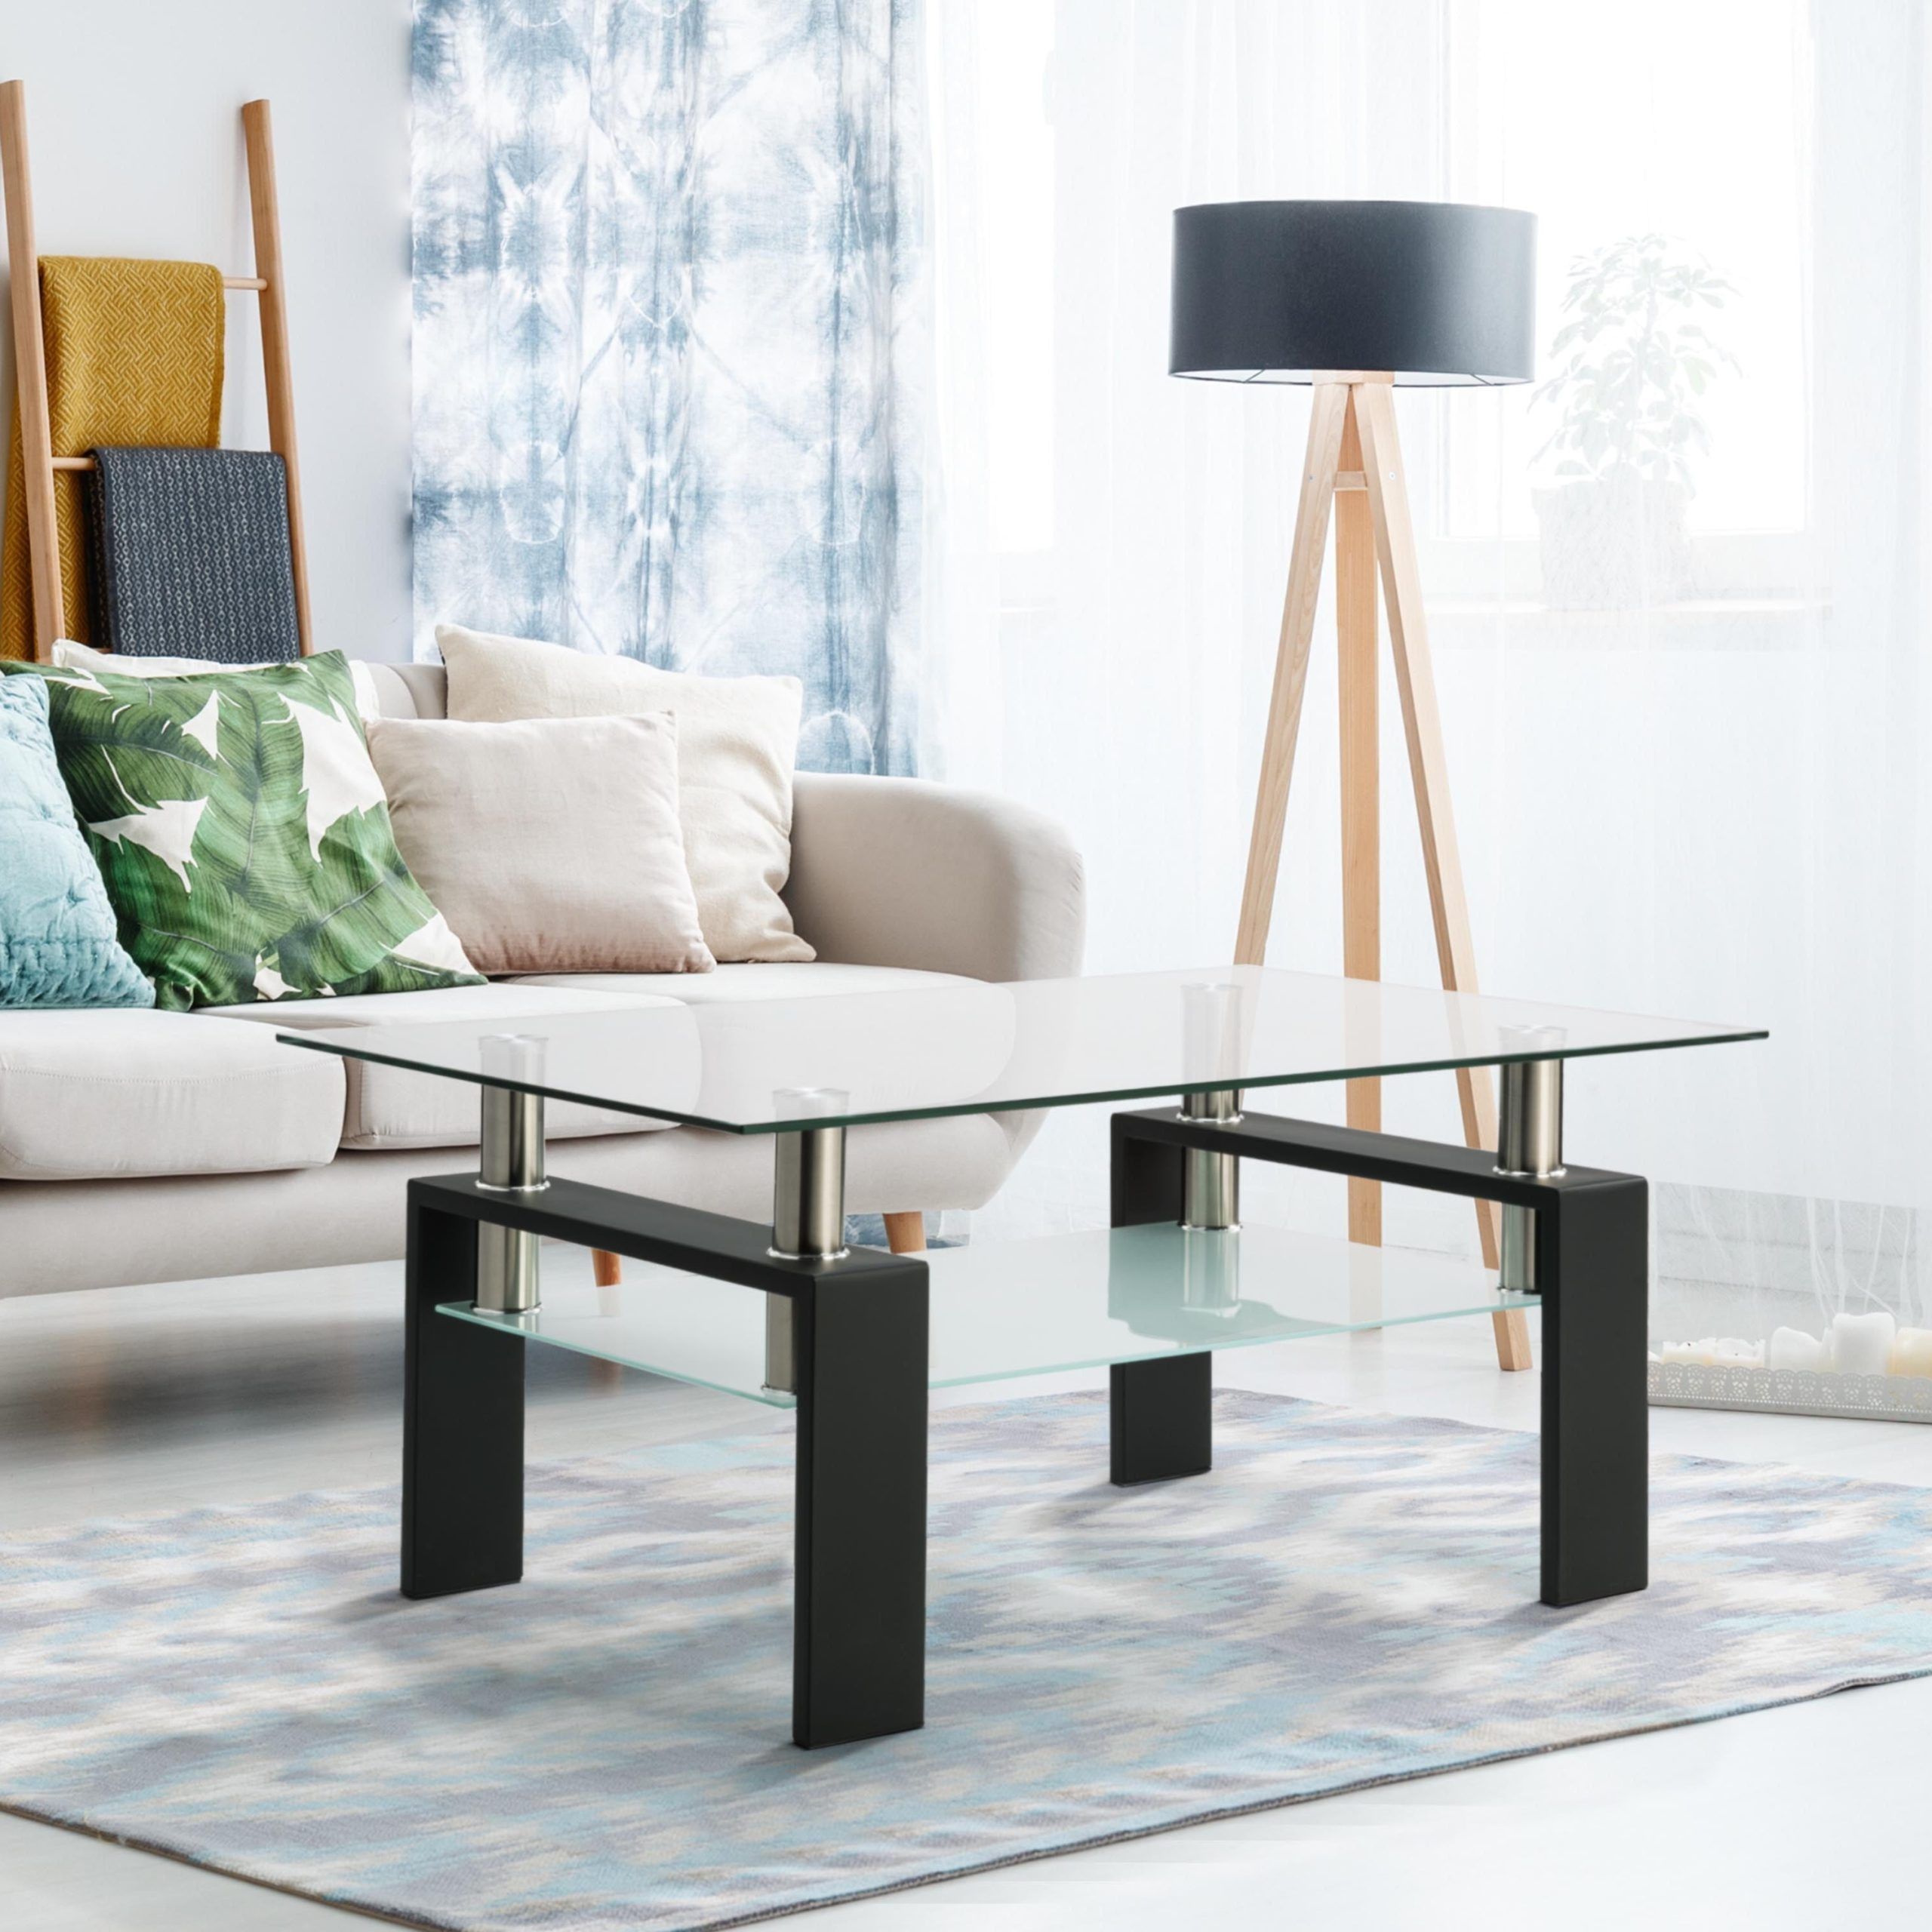 Favorite Clear Rectangle Glass Coffee Table With Lower Shelf,moderntable With Regarding Glass Coffee Tables With Lower Shelves (View 4 of 15)